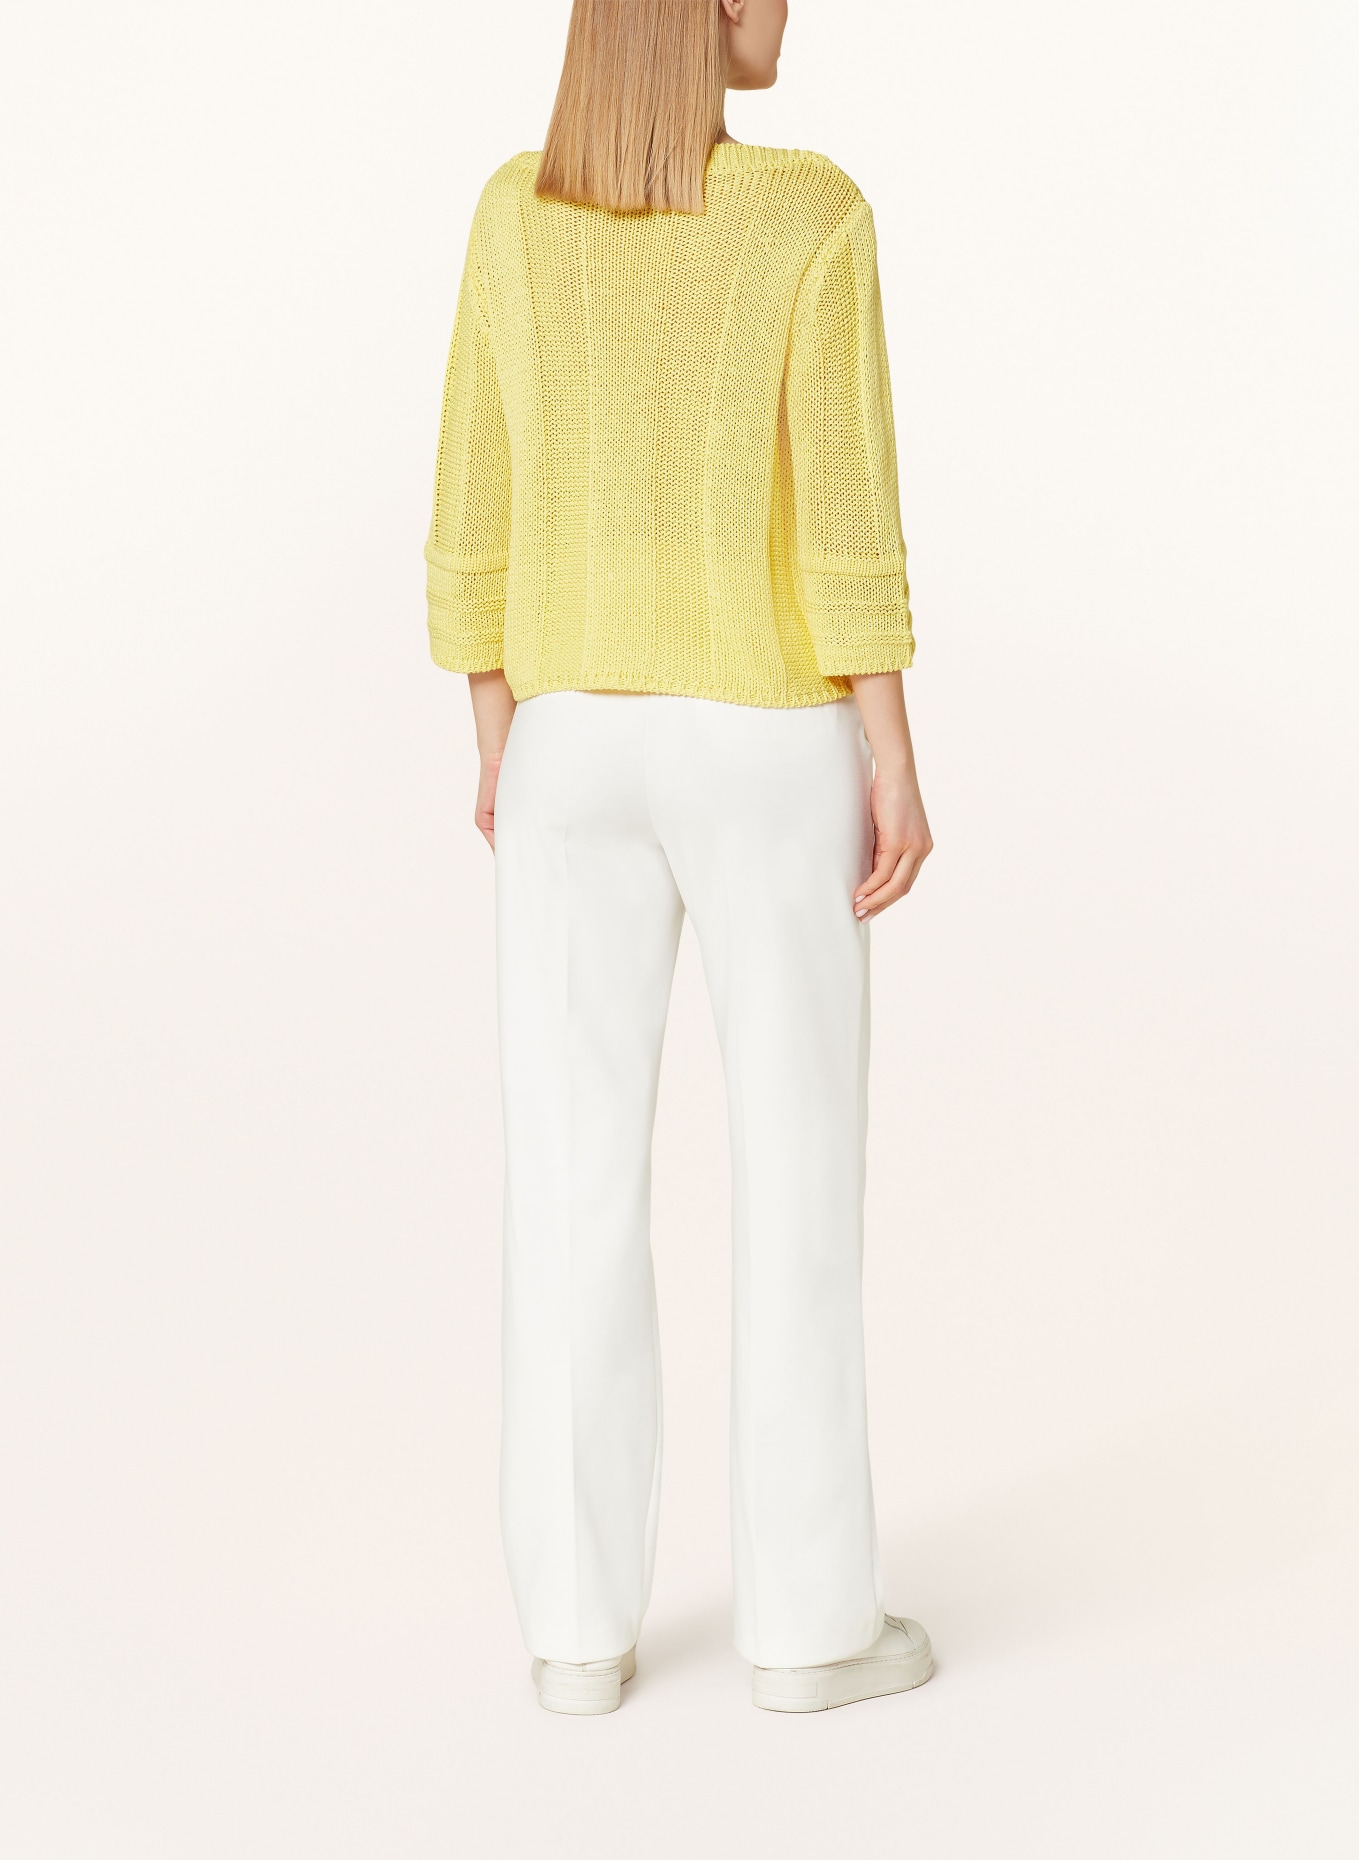 monari Sweater with 3/4 sleeves, Color: YELLOW (Image 3)